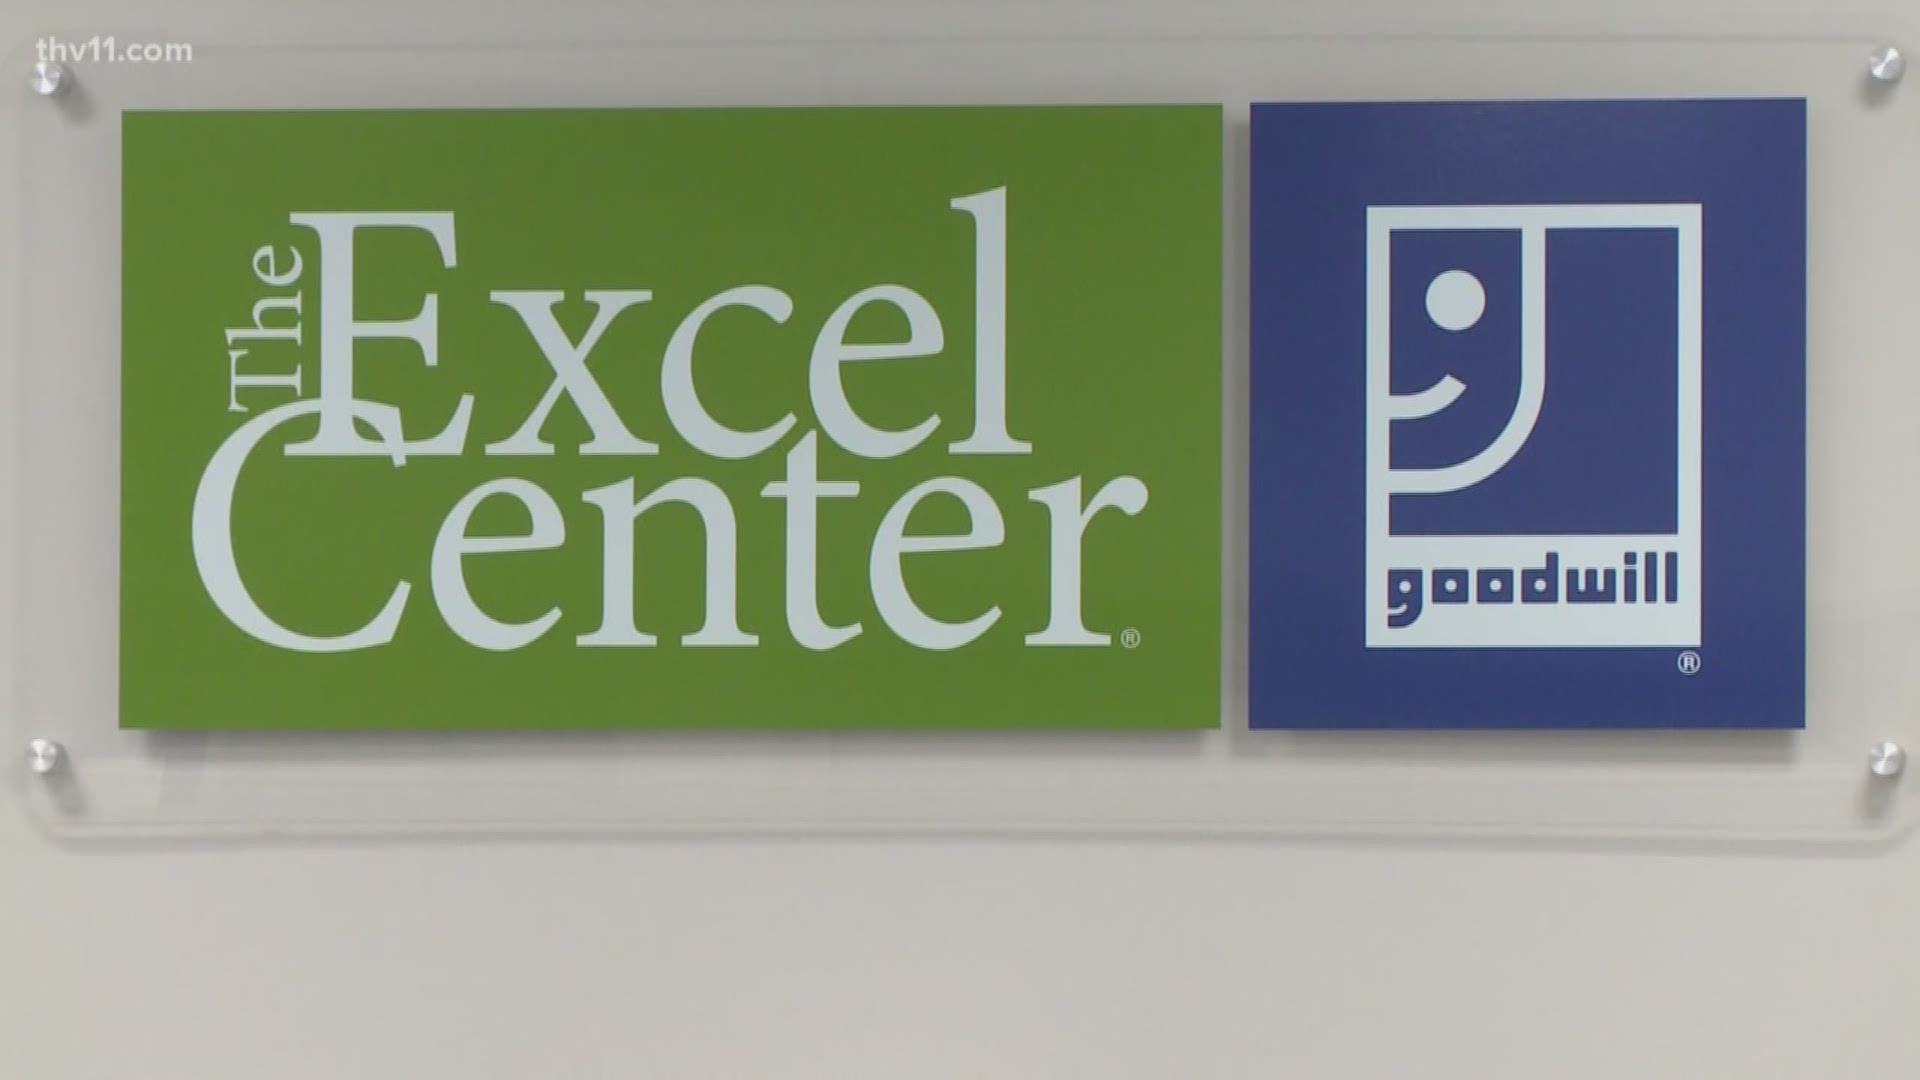 There are many more opportunities coming to adults who want to finish getting their high school education, Goodwill is expanding its Excel Center.